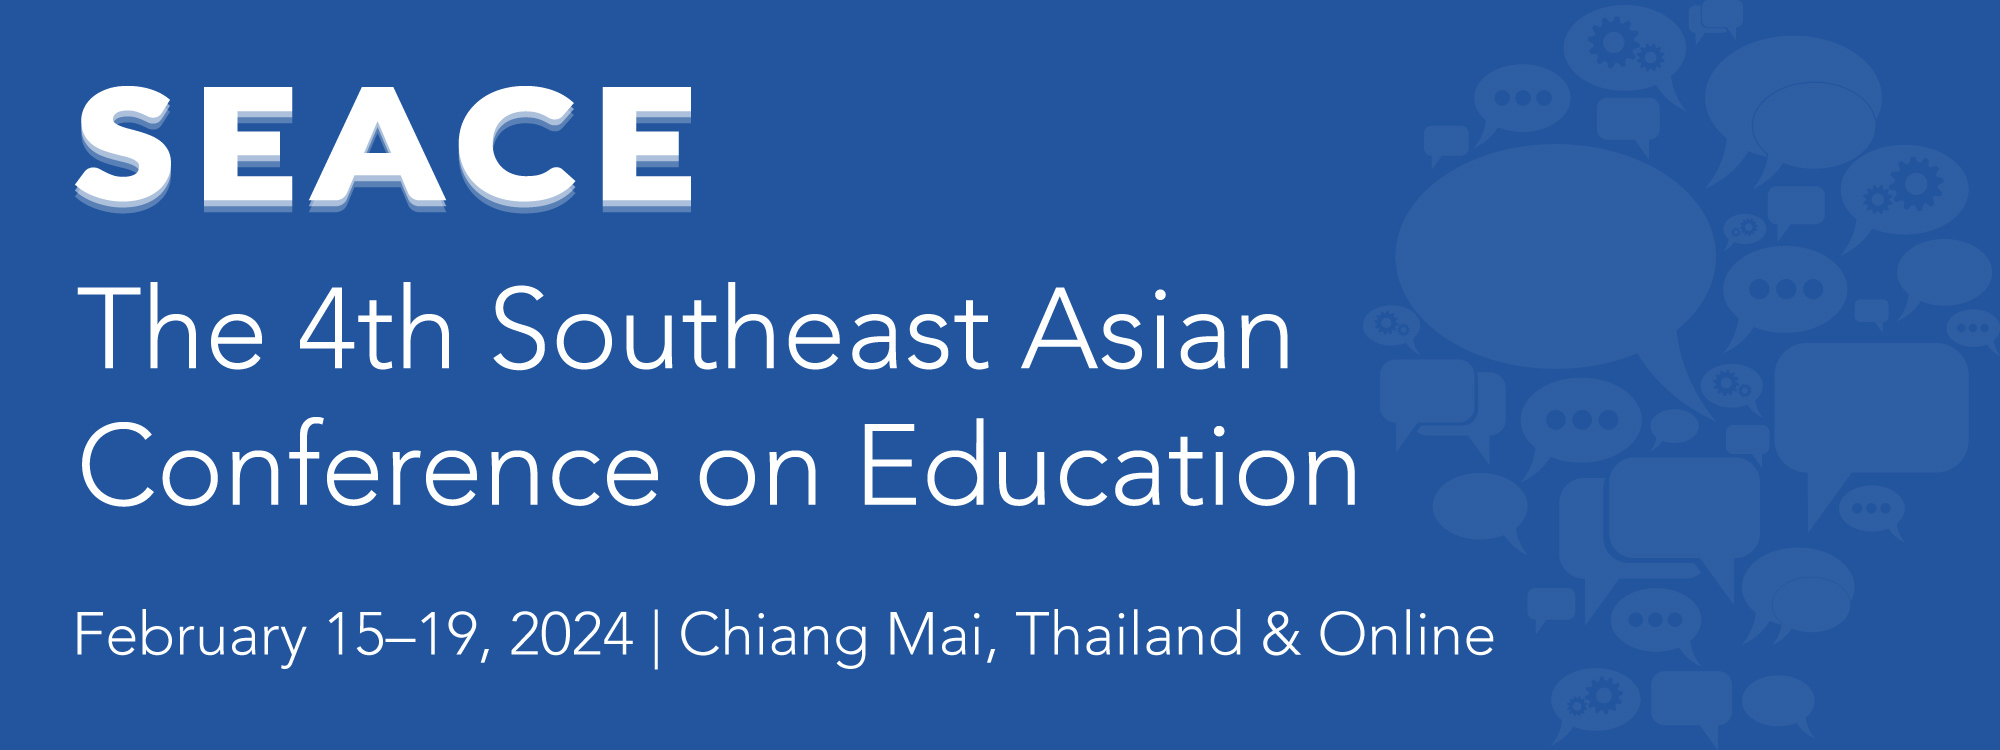 The 4th Southeast Asian Conference on Education SEACE2024 Logo